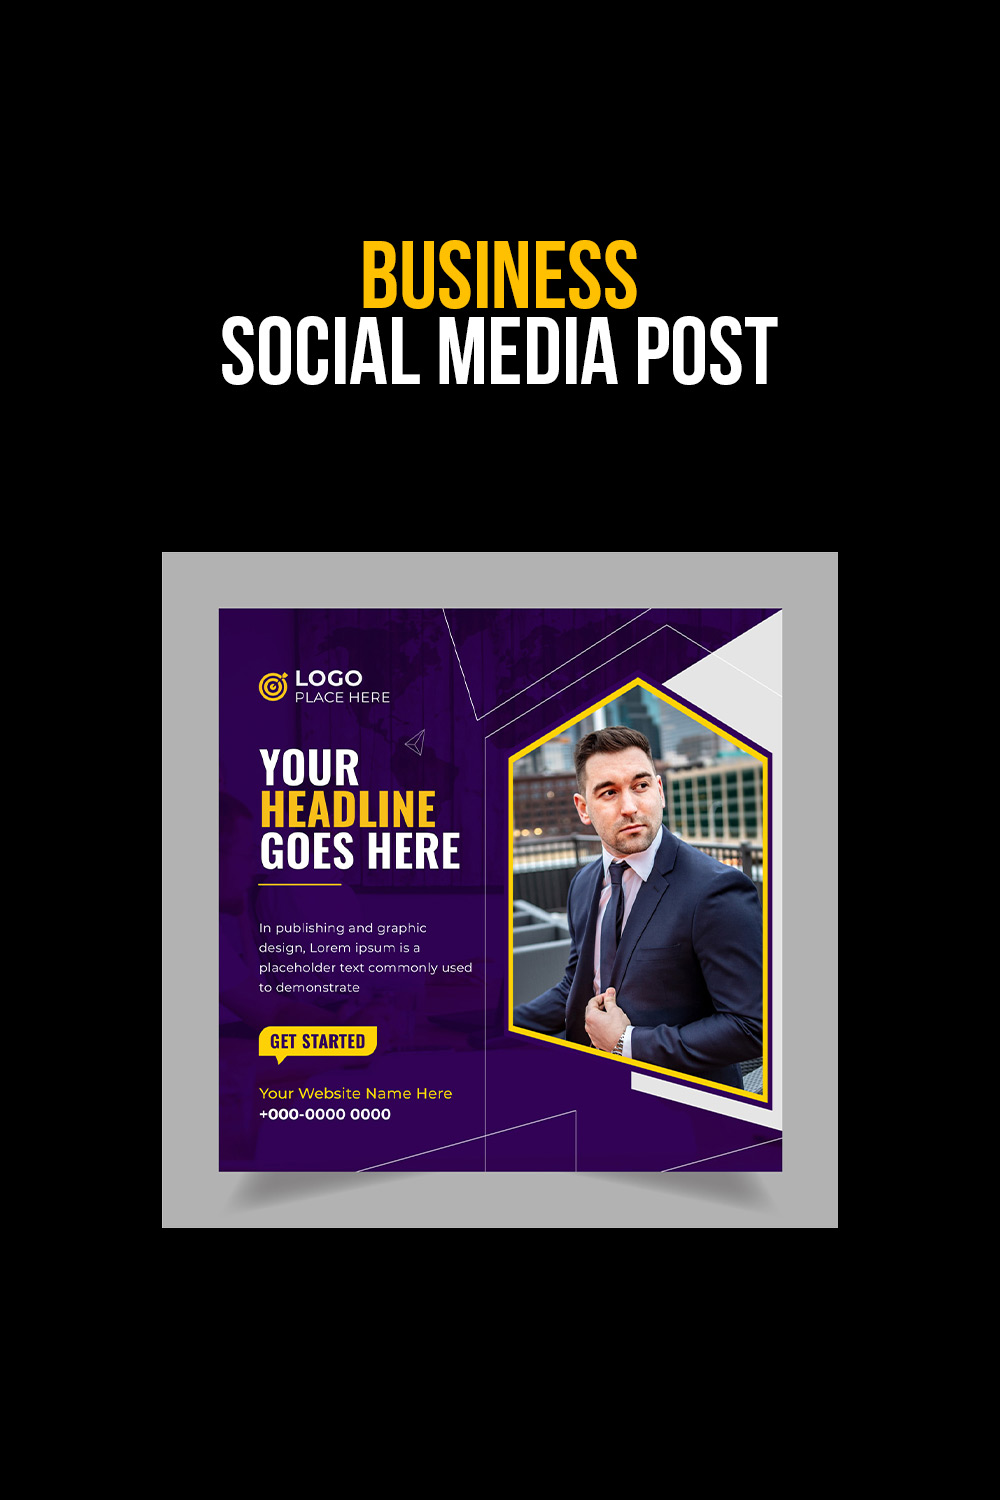 Digital marketing agency webinar or corporate social media post template vector only-$4 pinterest preview image.